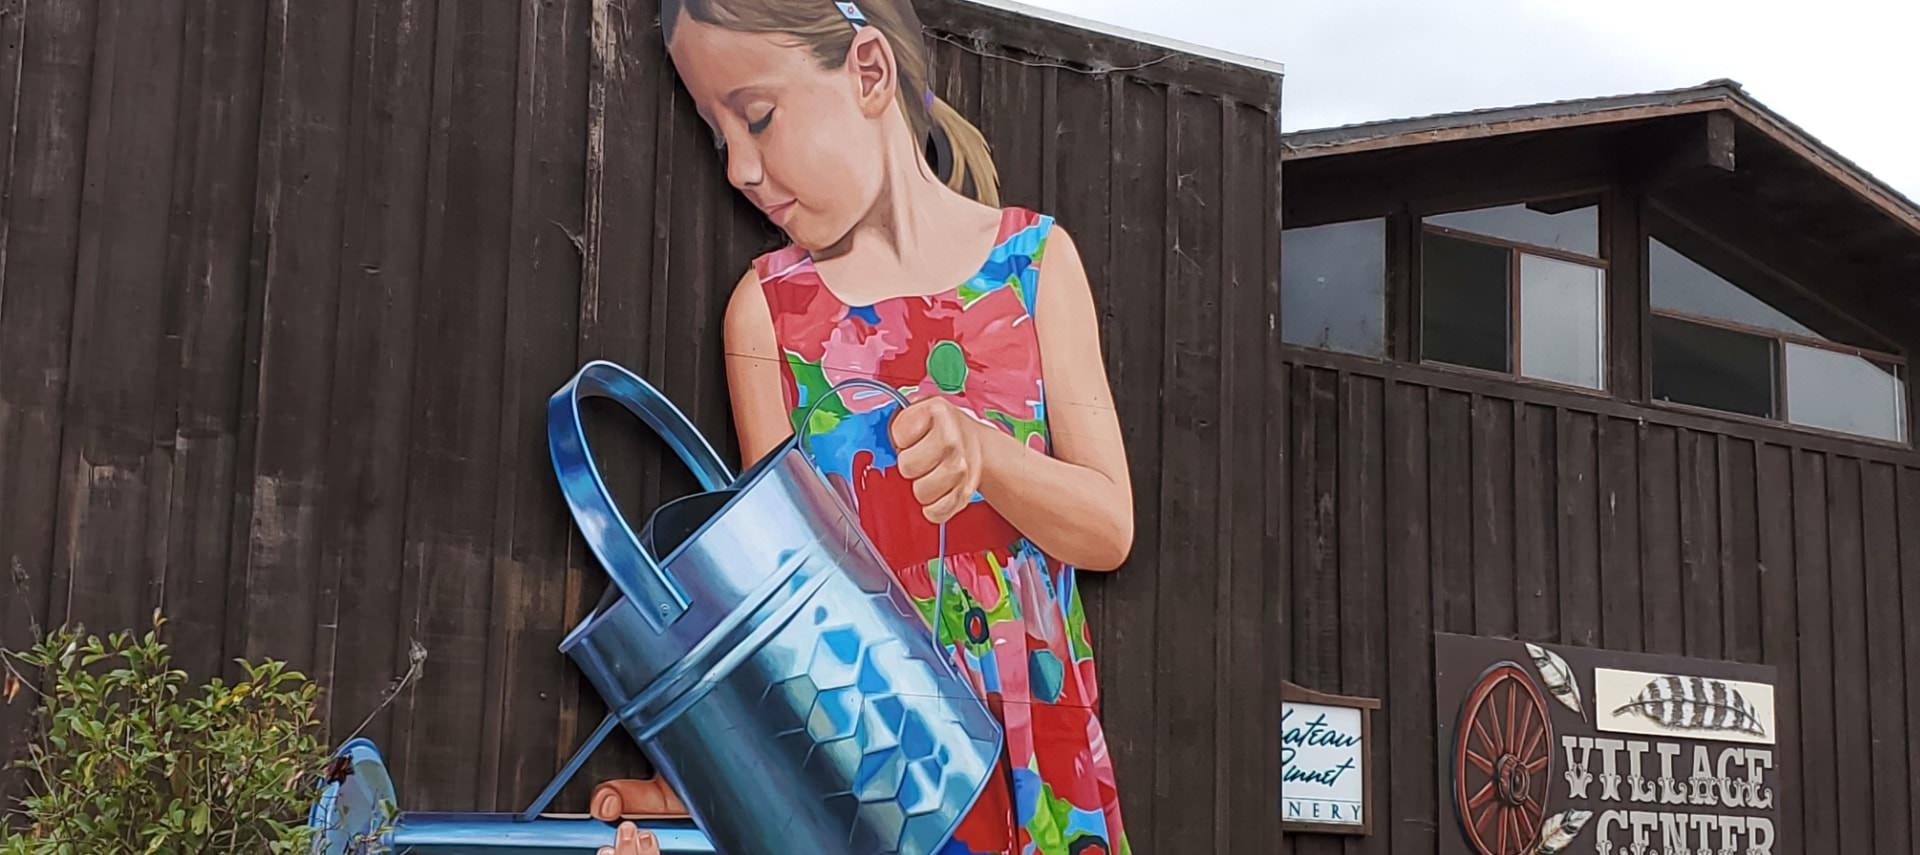 Dark wooden fence with a large picture of a child wearing a flower dress holding a metal watering can